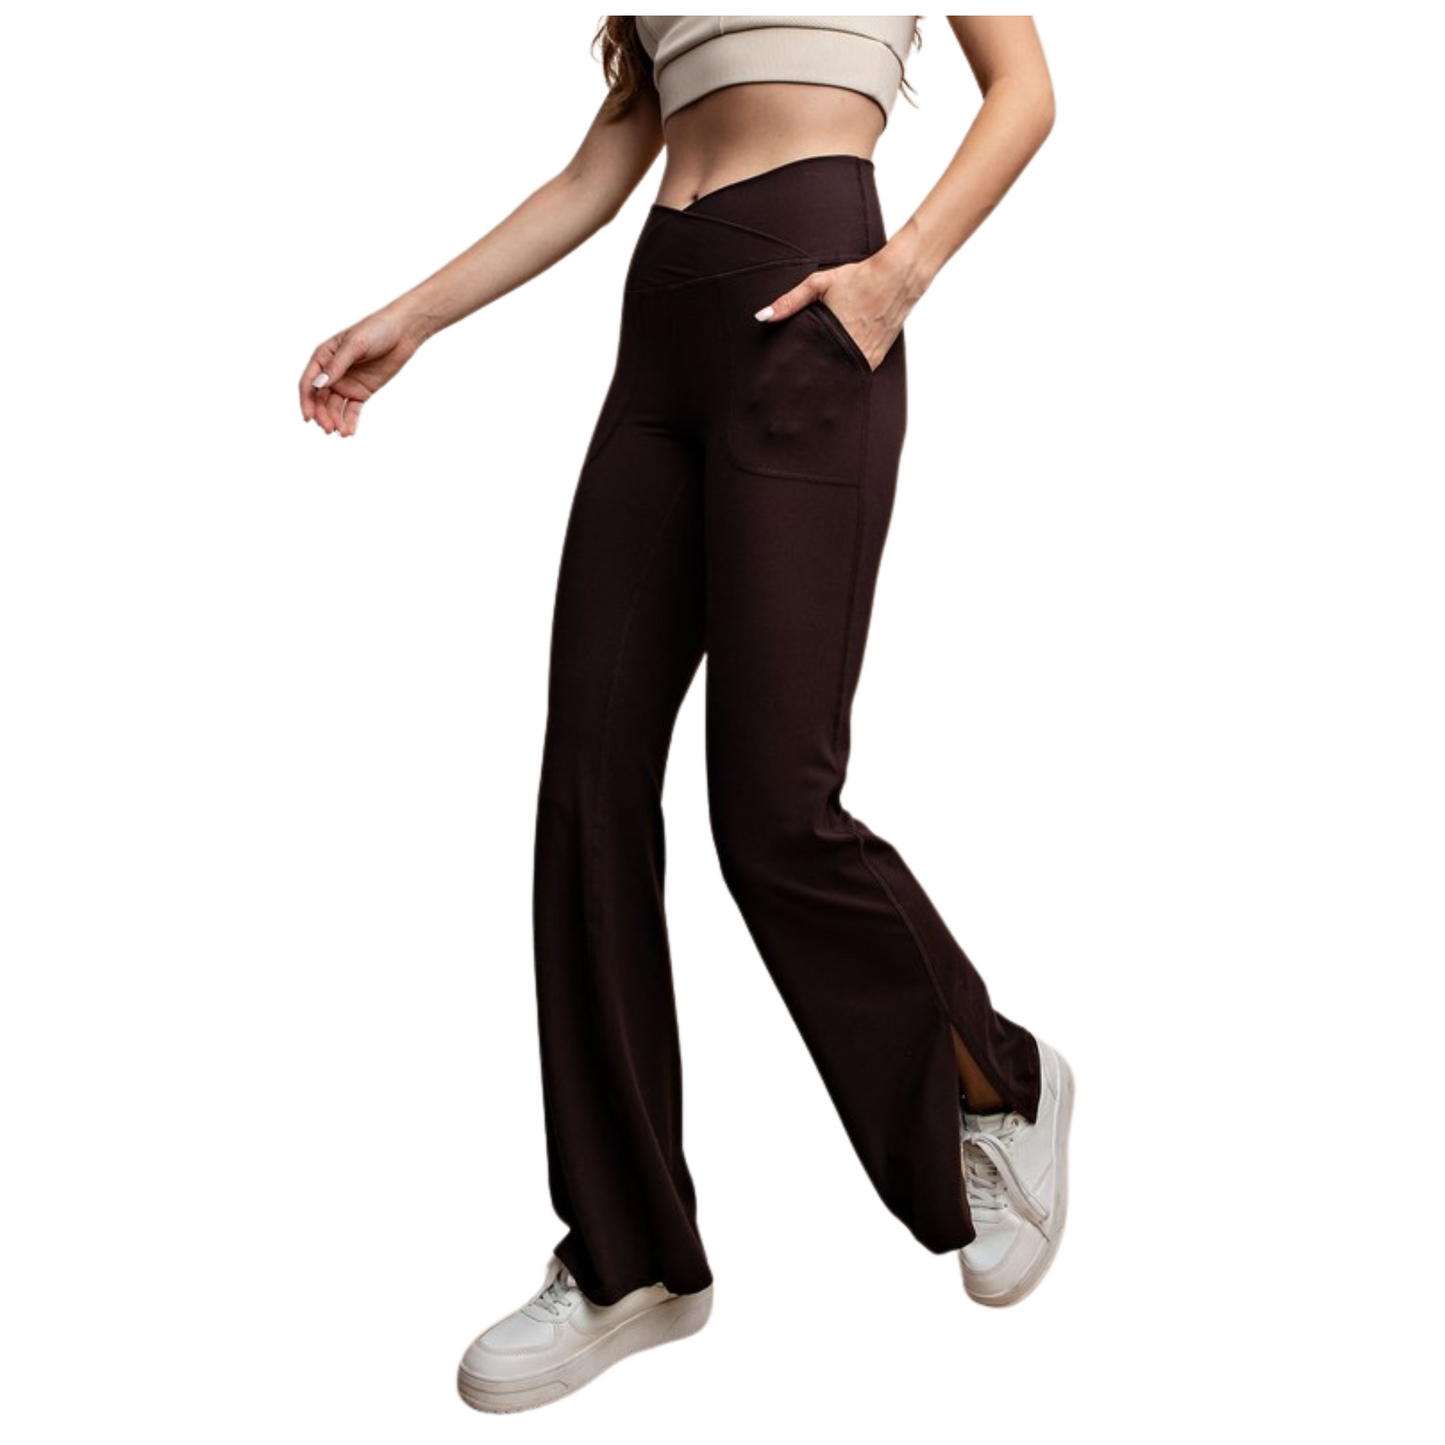 Experience ultimate comfort with our V Waist Flared Yoga Pants. Made with butter soft fabric, these pants offer a smooth and luxurious feel. Designed with a V waist for a flattering fit and flared bottoms for added style. Perfect for yoga with convenient pockets. Available in black.